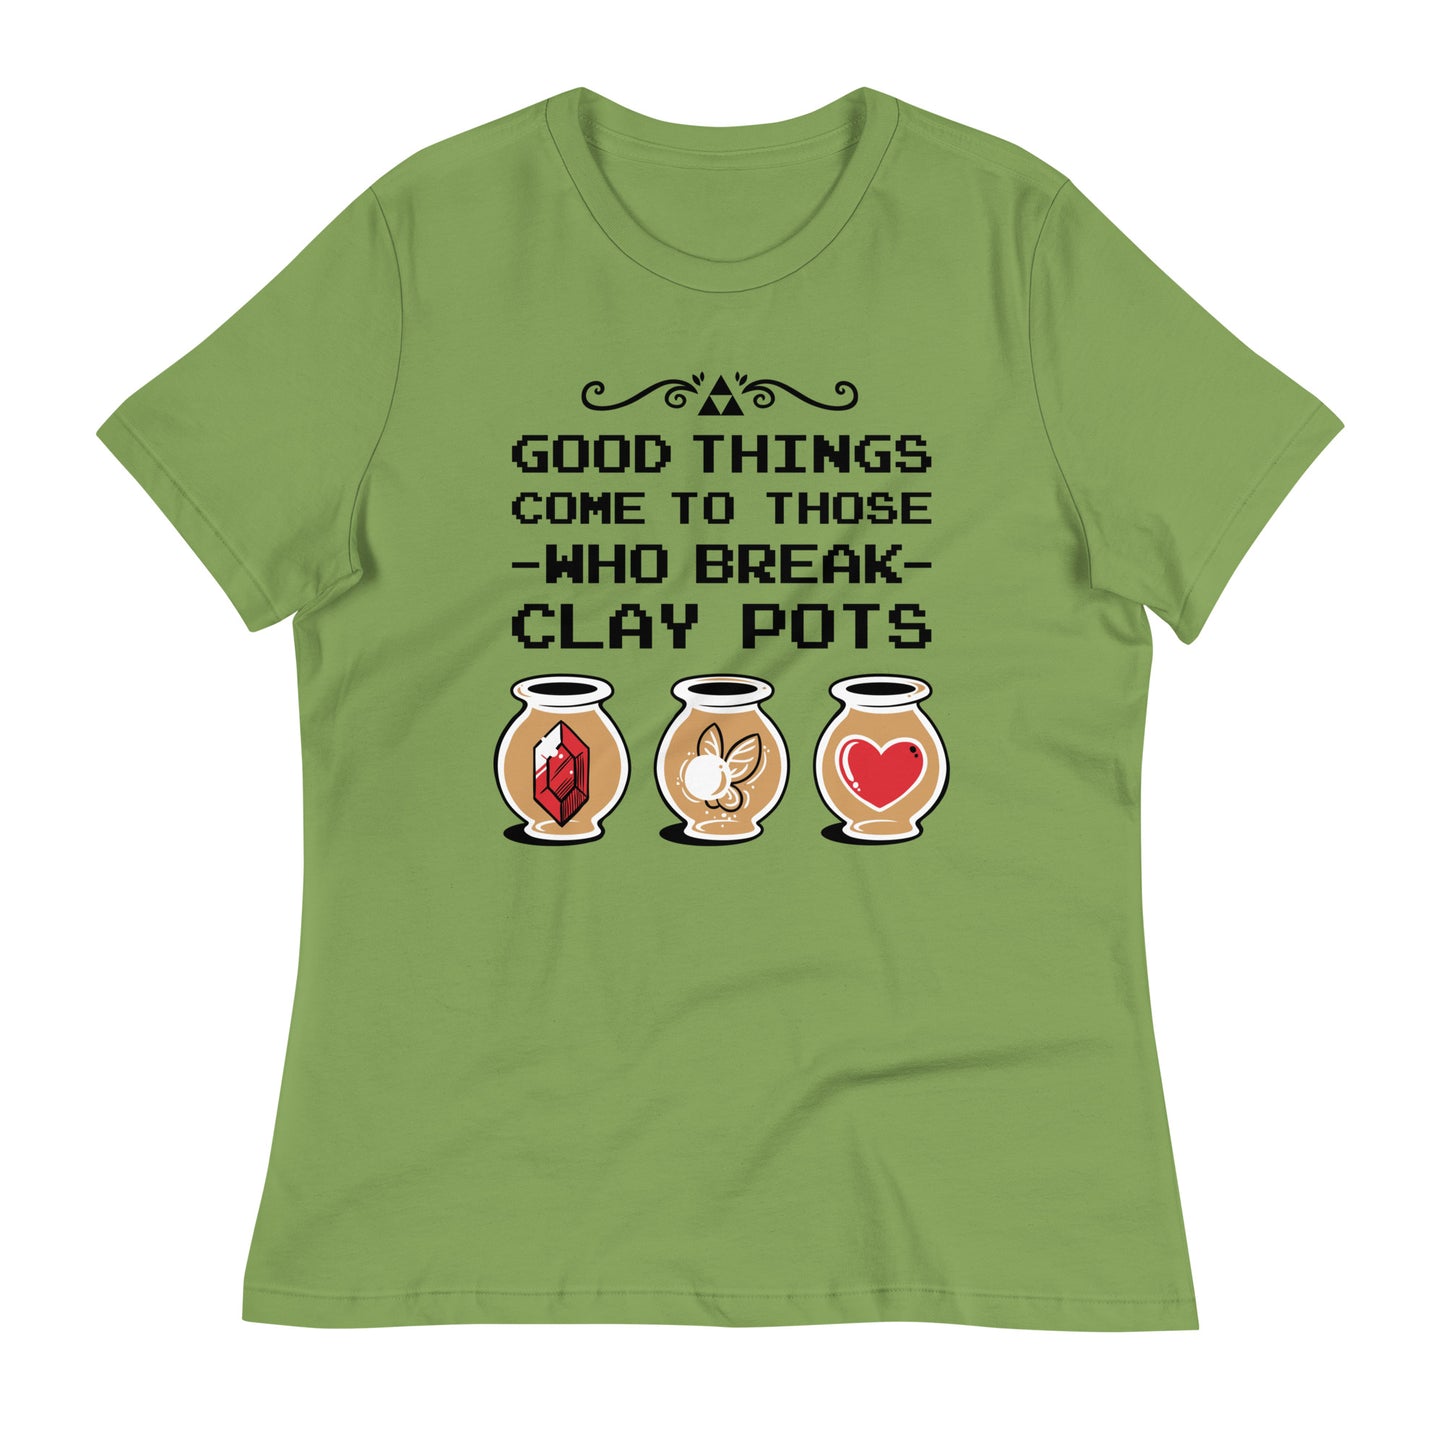 Good Things Come To Those Who Break Clay Pots Women's Signature Tee